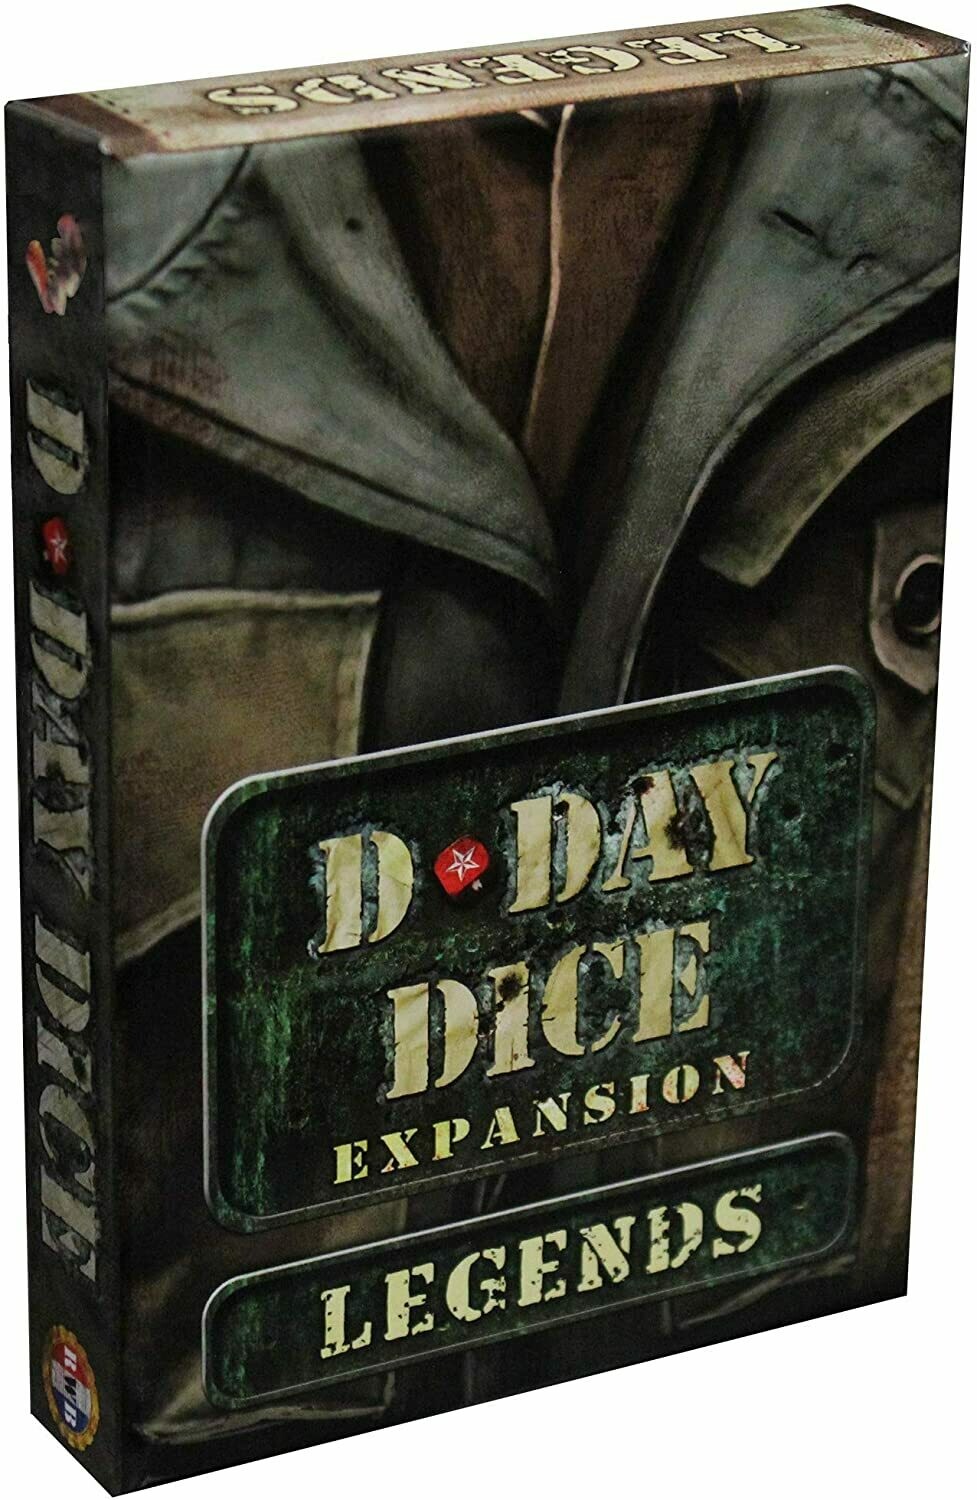 D-Day Dice, 2nd Edition: Legends Expansion